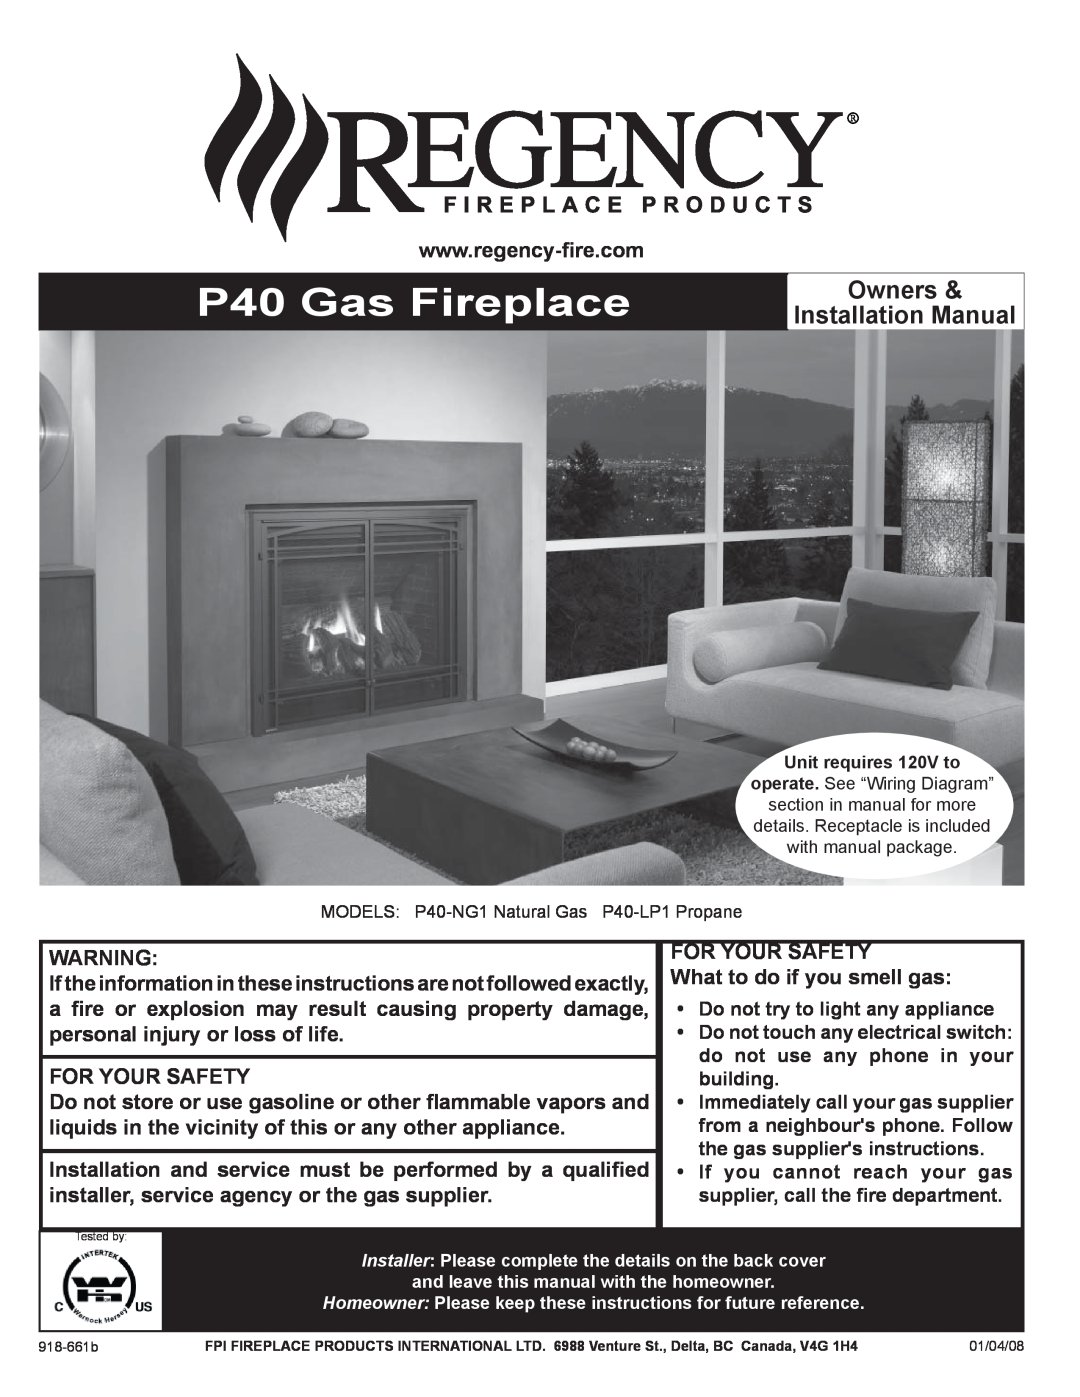 Regency P40-LP1, P40-NG1 installation manual P40 Gas Fireplace, Owners & Installation Manual 